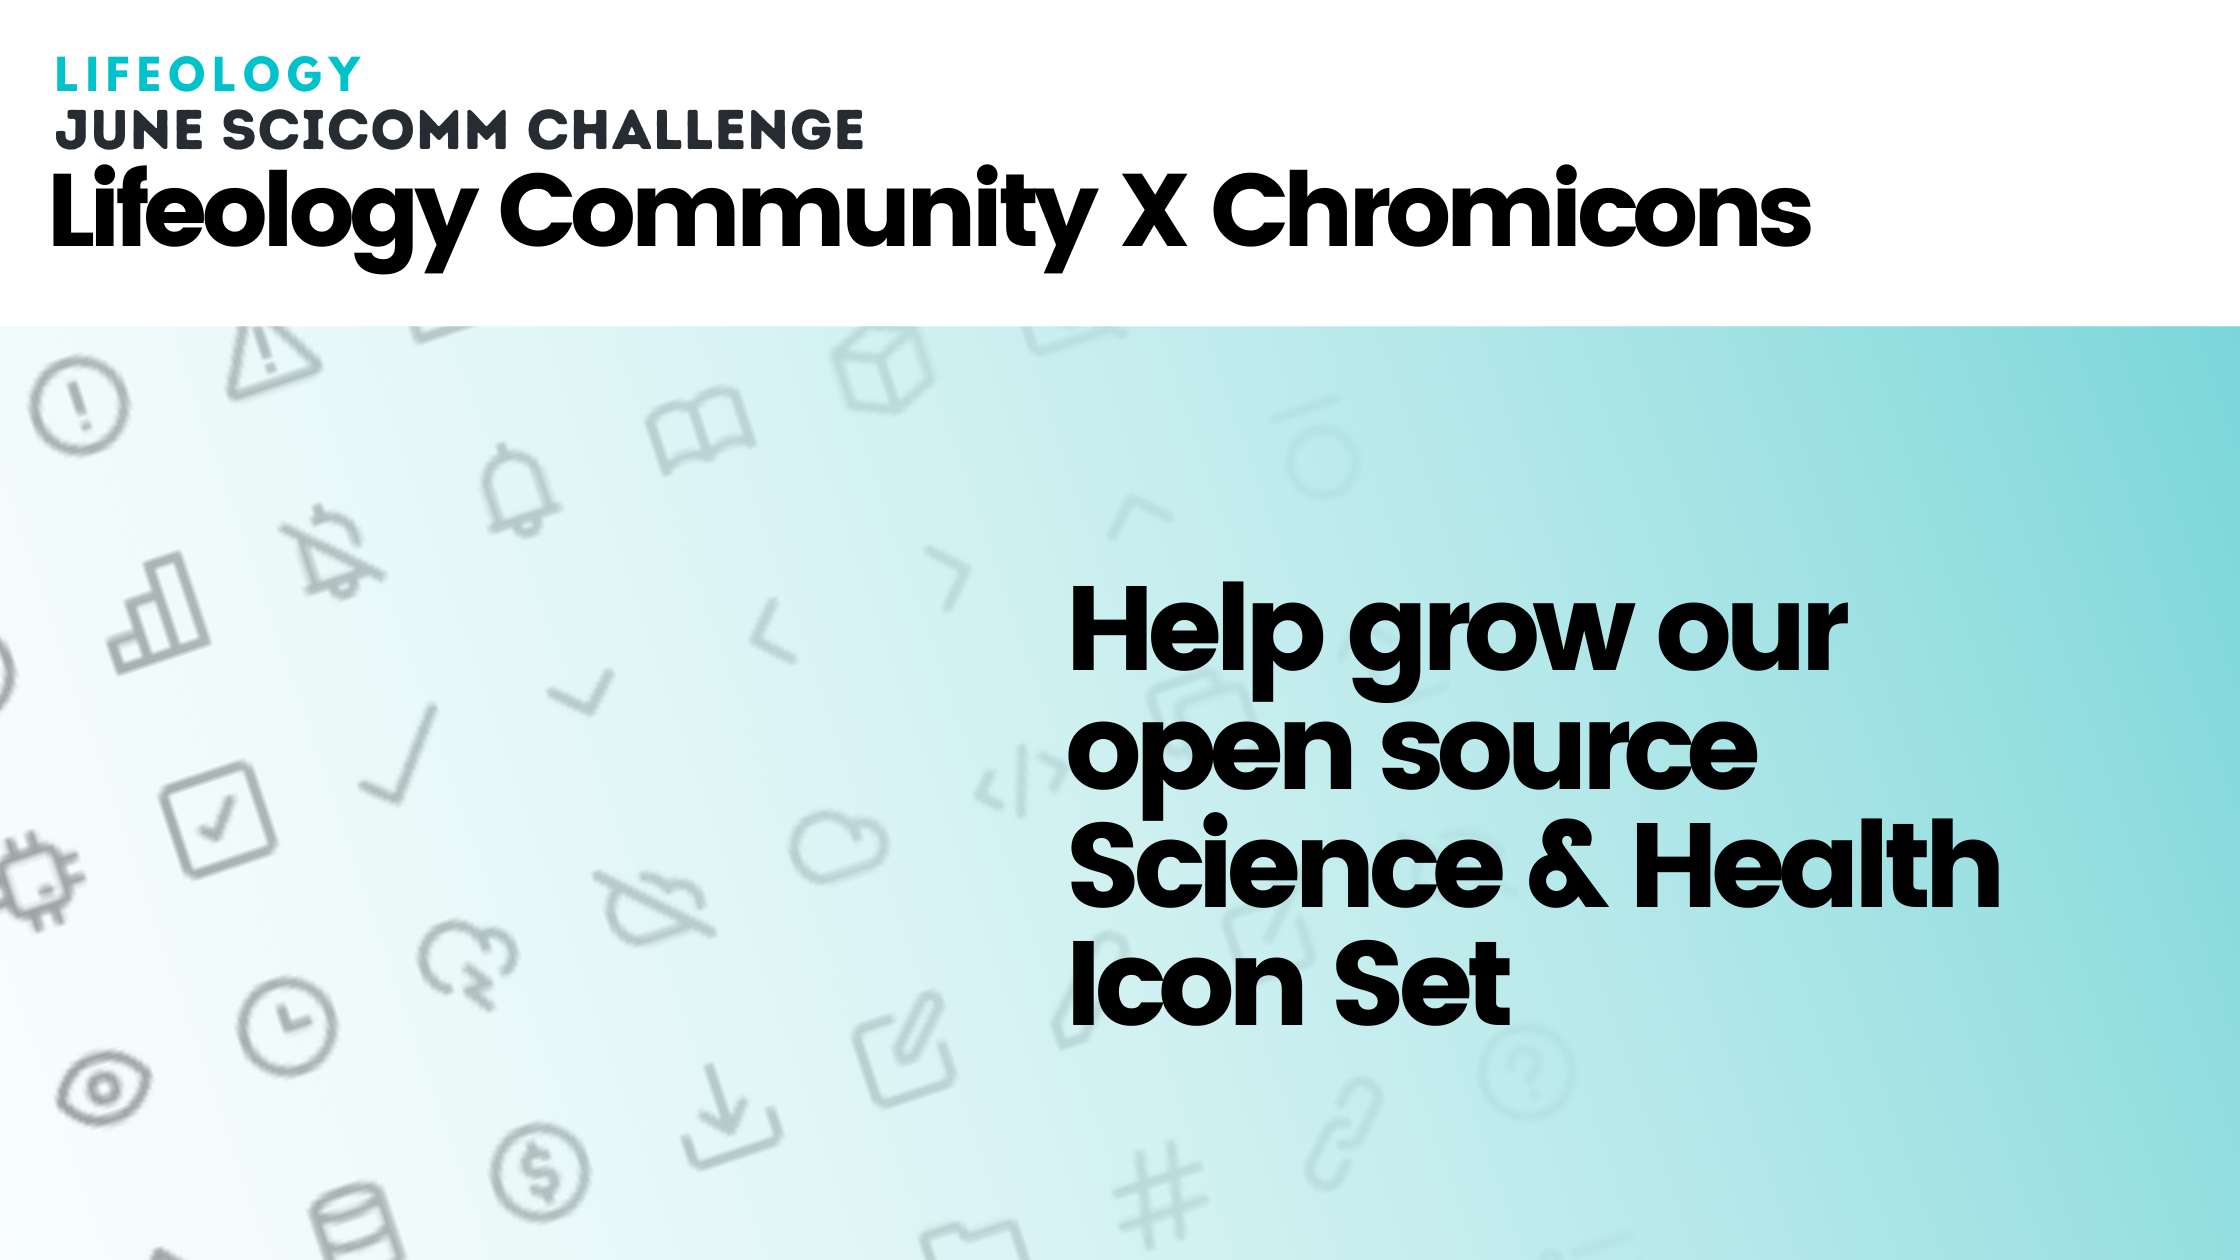 Lifeology Community X Chromicons - Help grow our open source science and health icon set